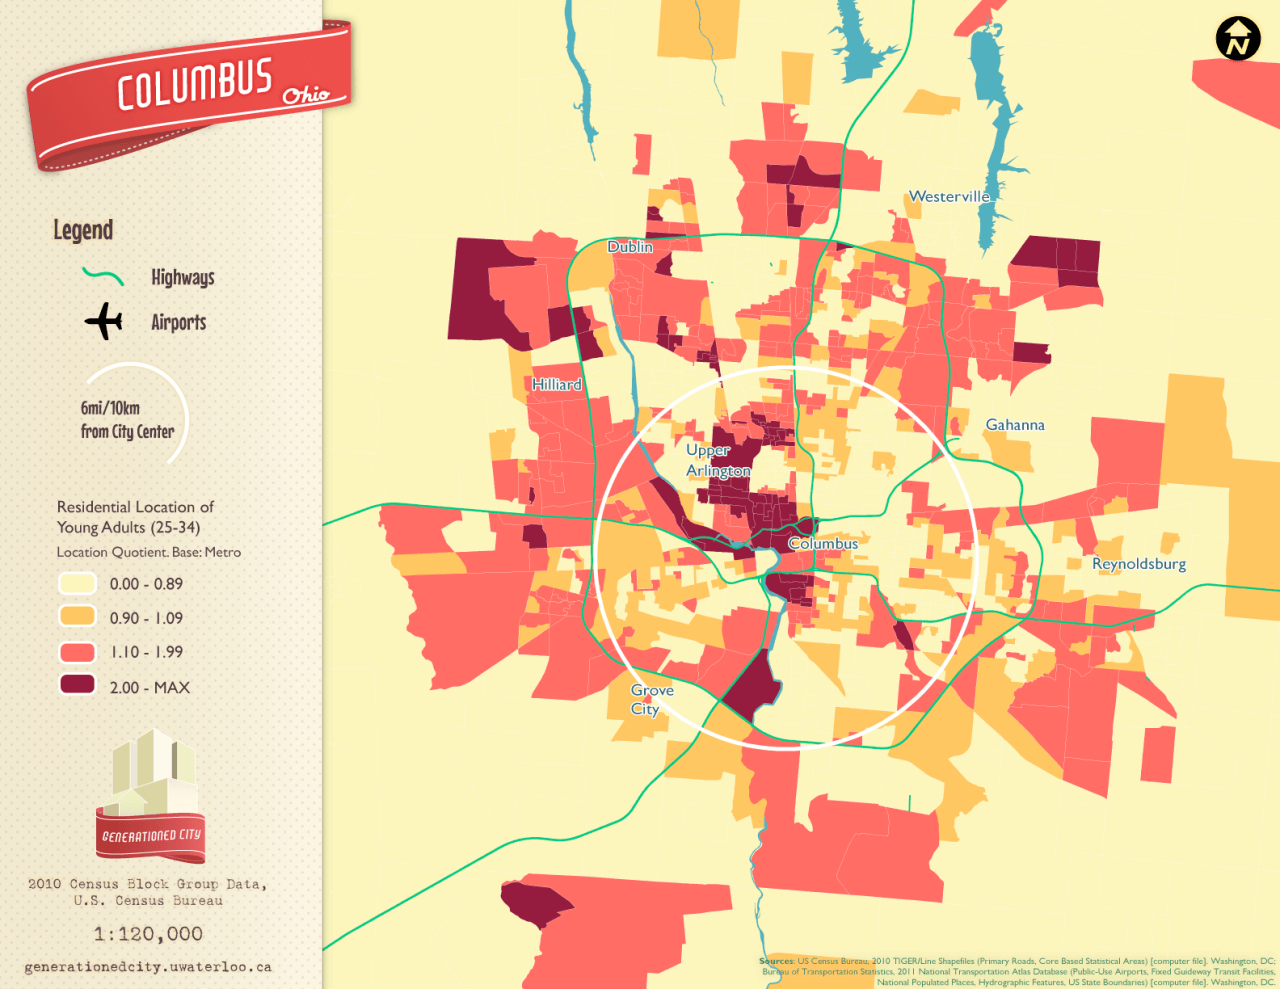 Residential location of young adults in Columbus.